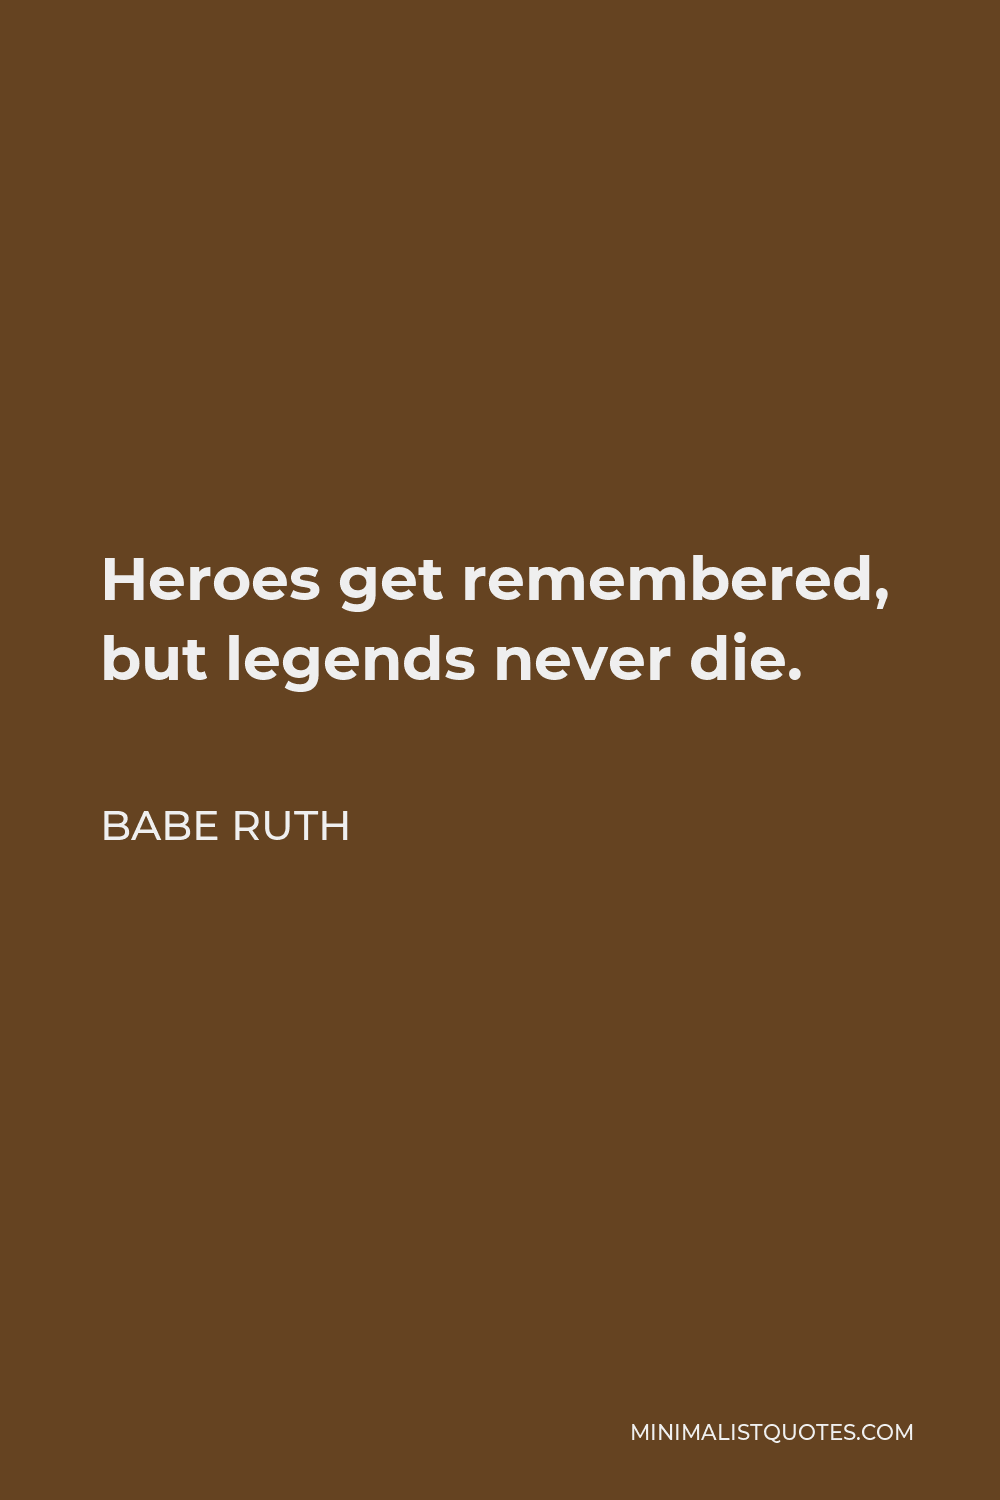 Download Babe Ruth Quote Wallpaper